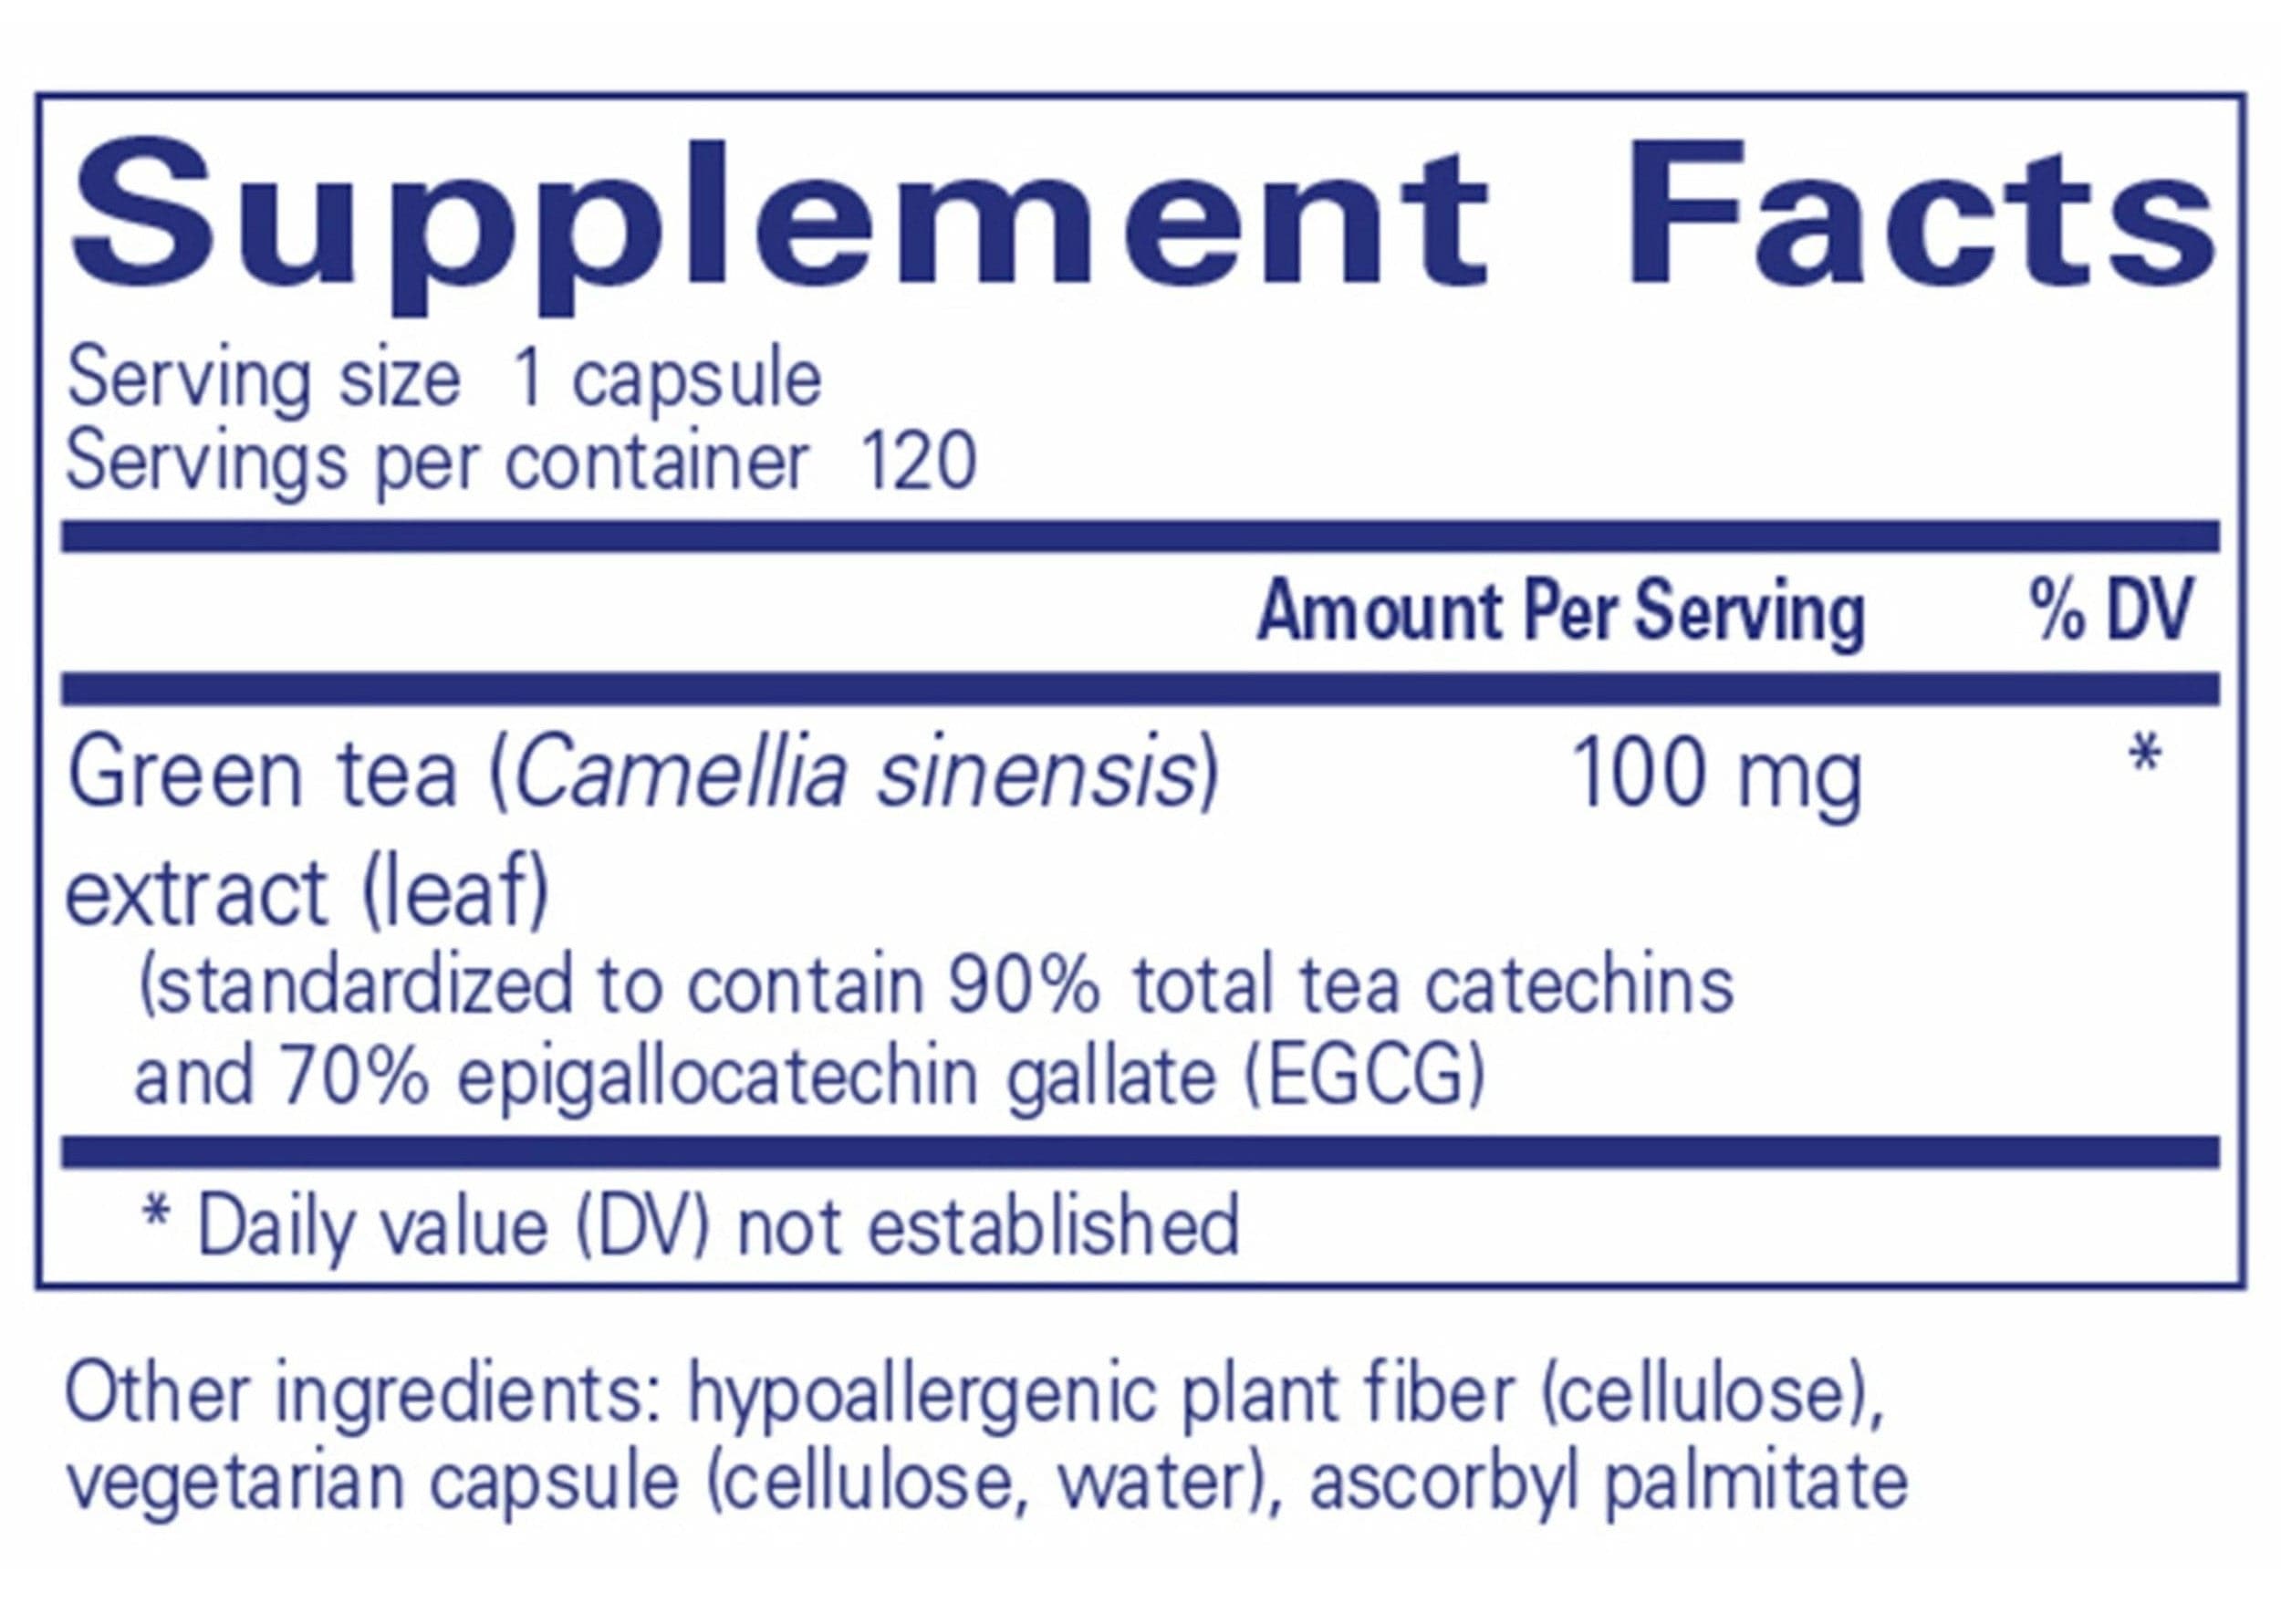 Pure Encapsulations Green Tea extract (decaffeinated) Ingredients